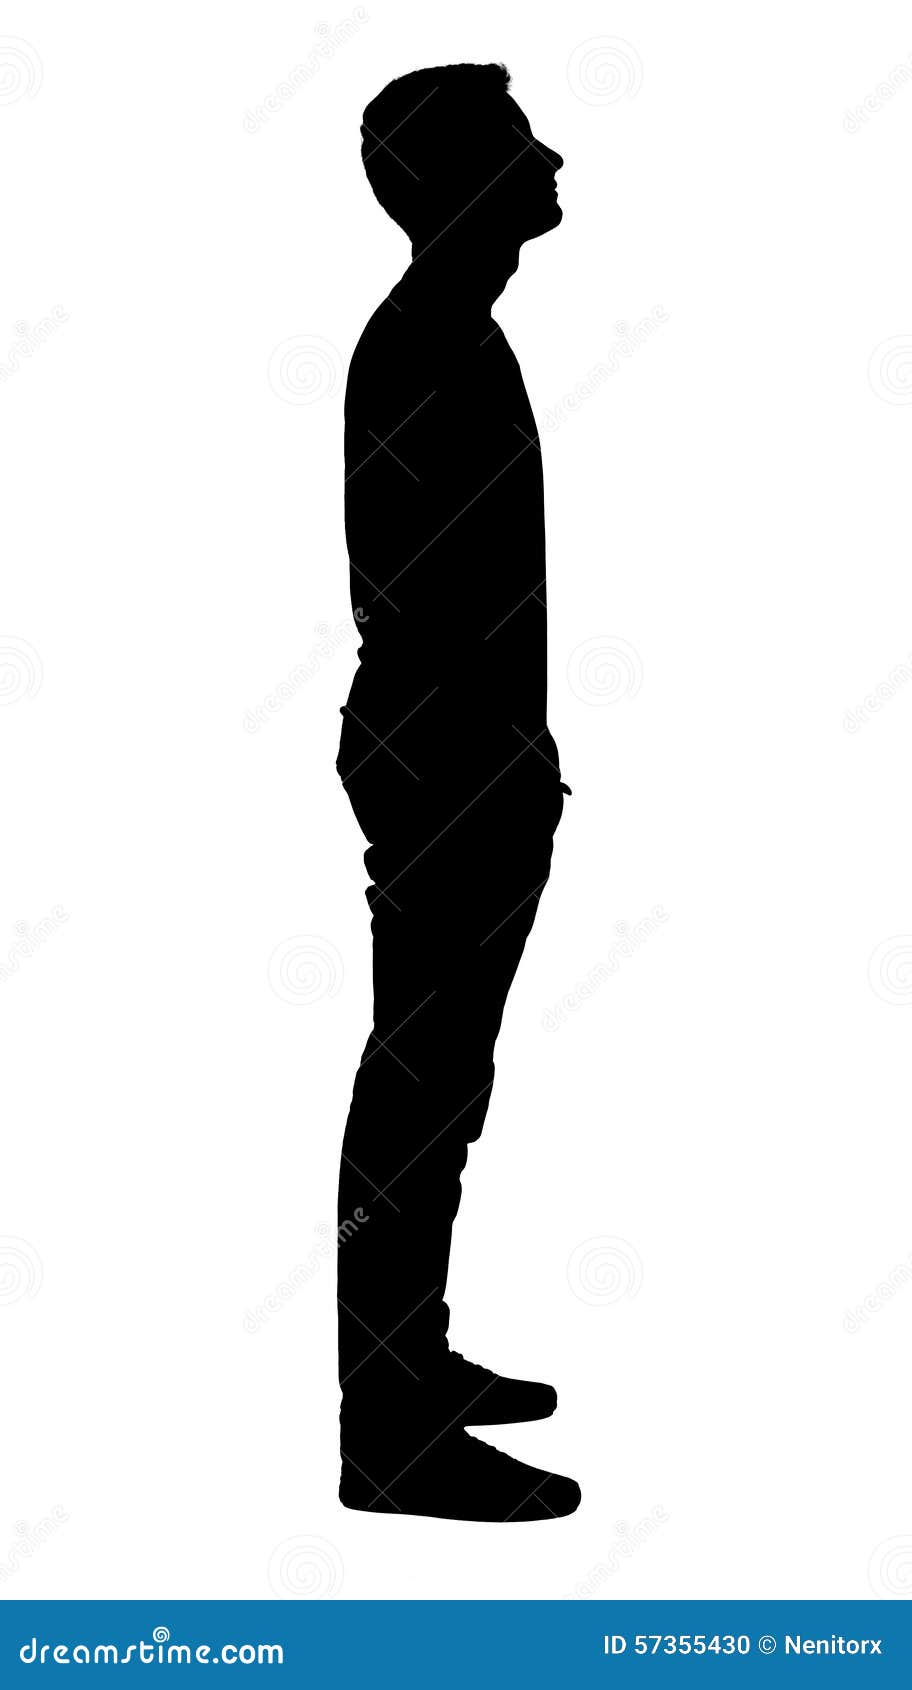 Standing boy's silhouette. stock illustration. Image of people - 57355430